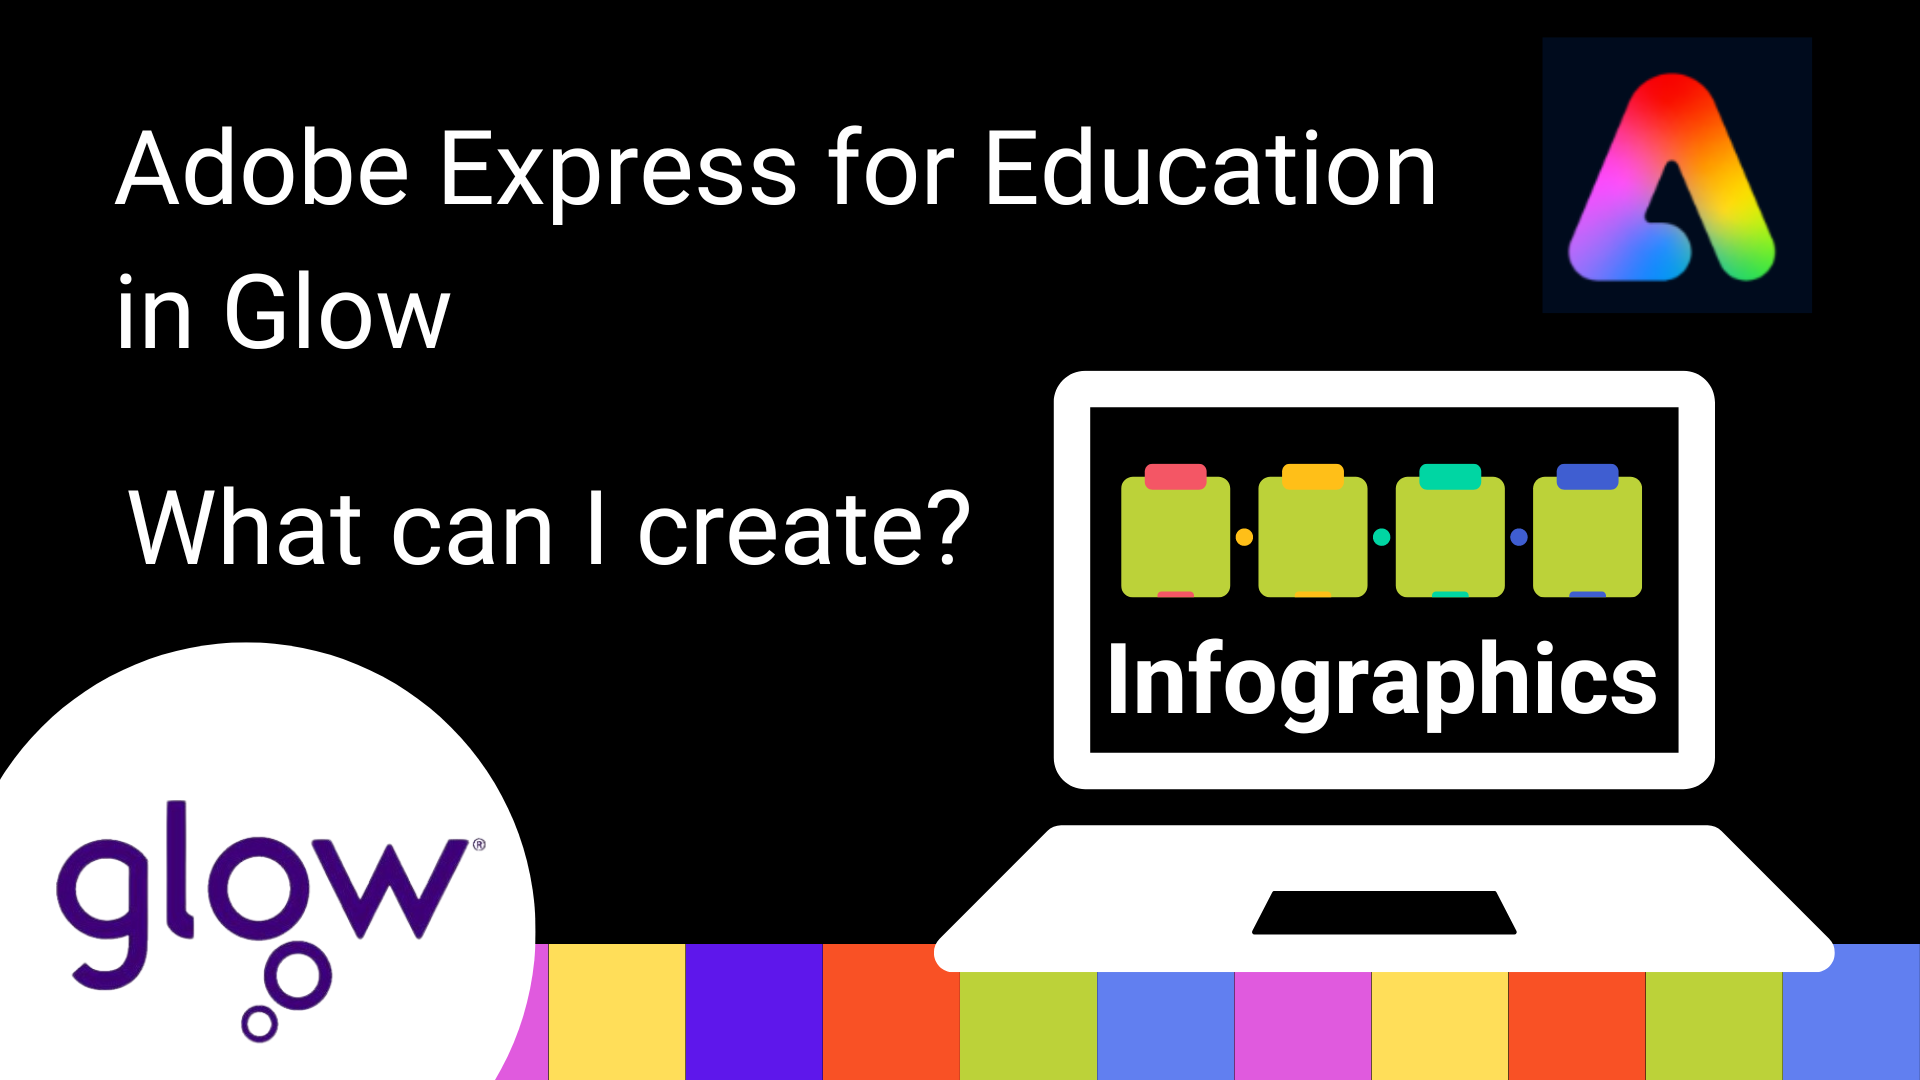 Adobe Express for Education in glow graphic. What can I create? Infographics